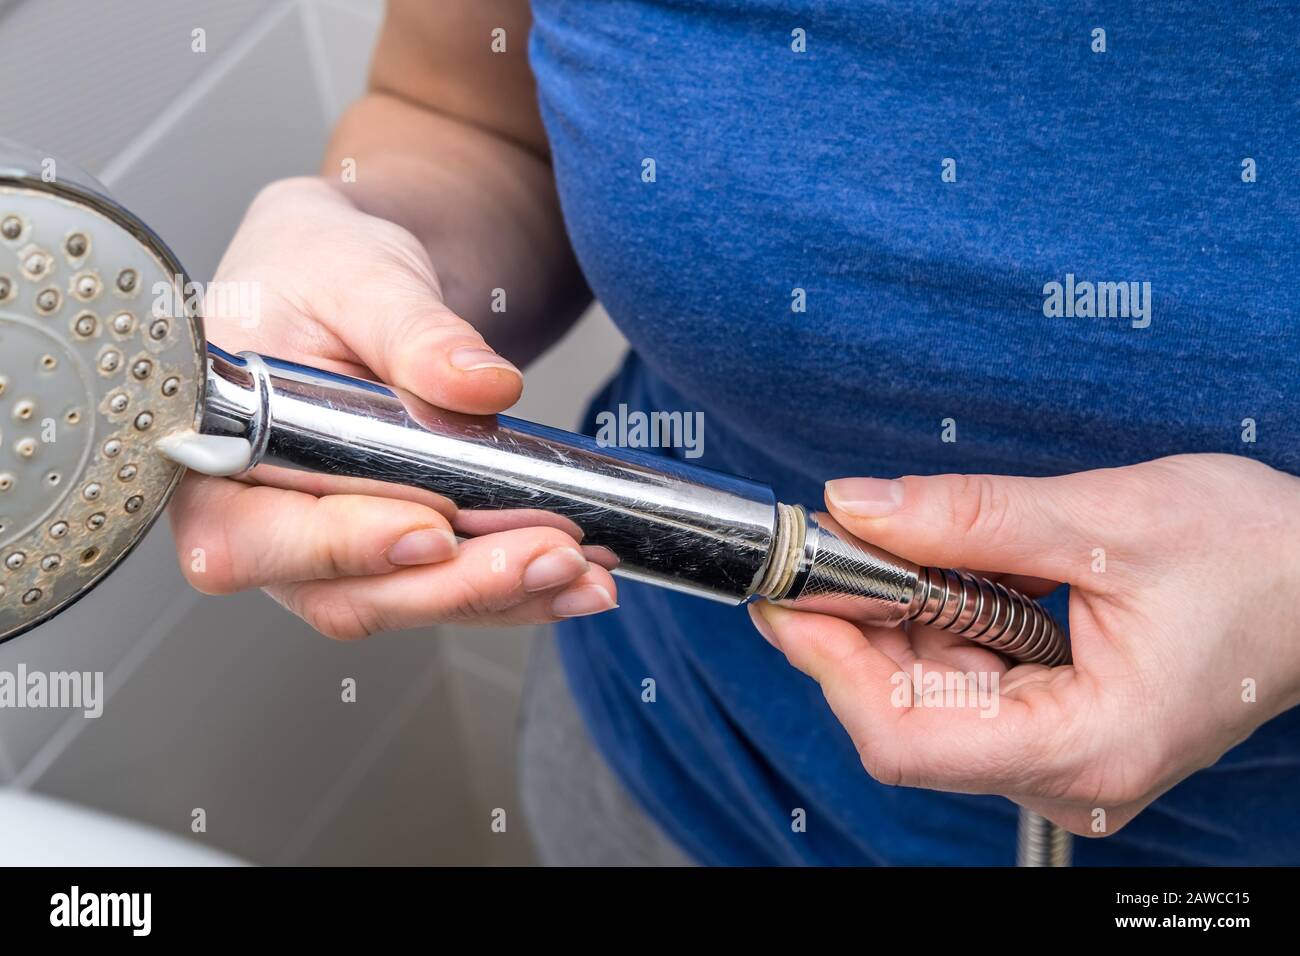 https://c8.alamy.com/comp/2AWCC15/woman-is-holding-a-broken-shower-sprinkler-head-in-her-hands-and-changes-to-a-new-one-2AWCC15.jpg